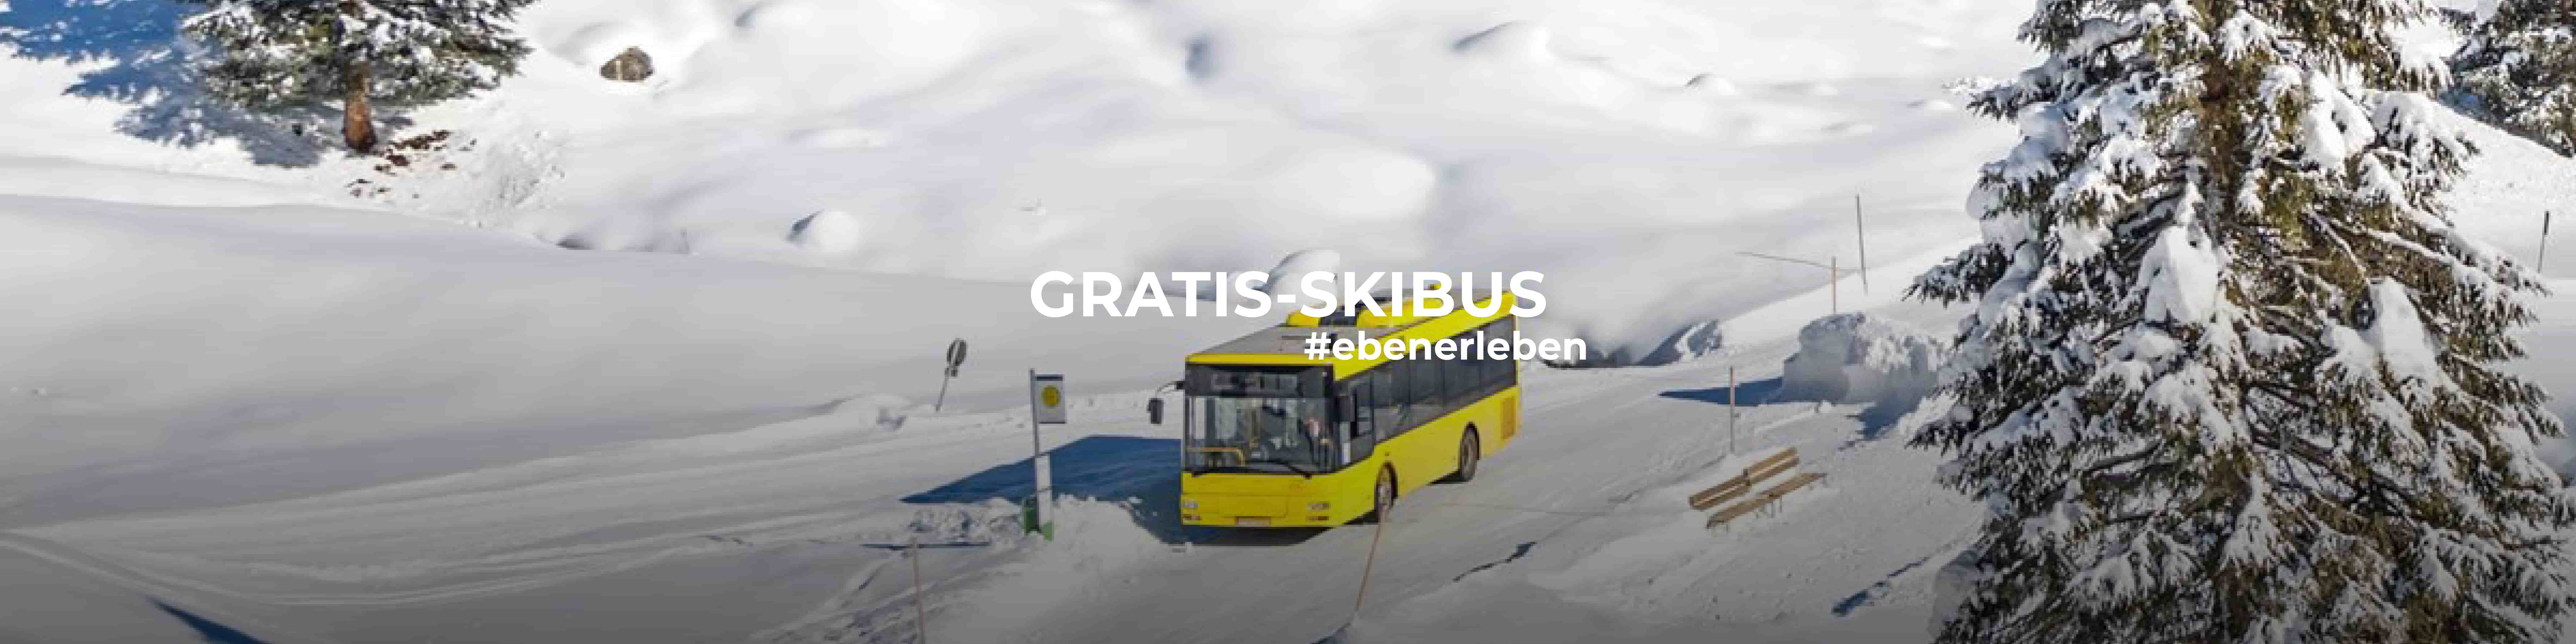 Free ski bus available in Eben and its surrounding villages